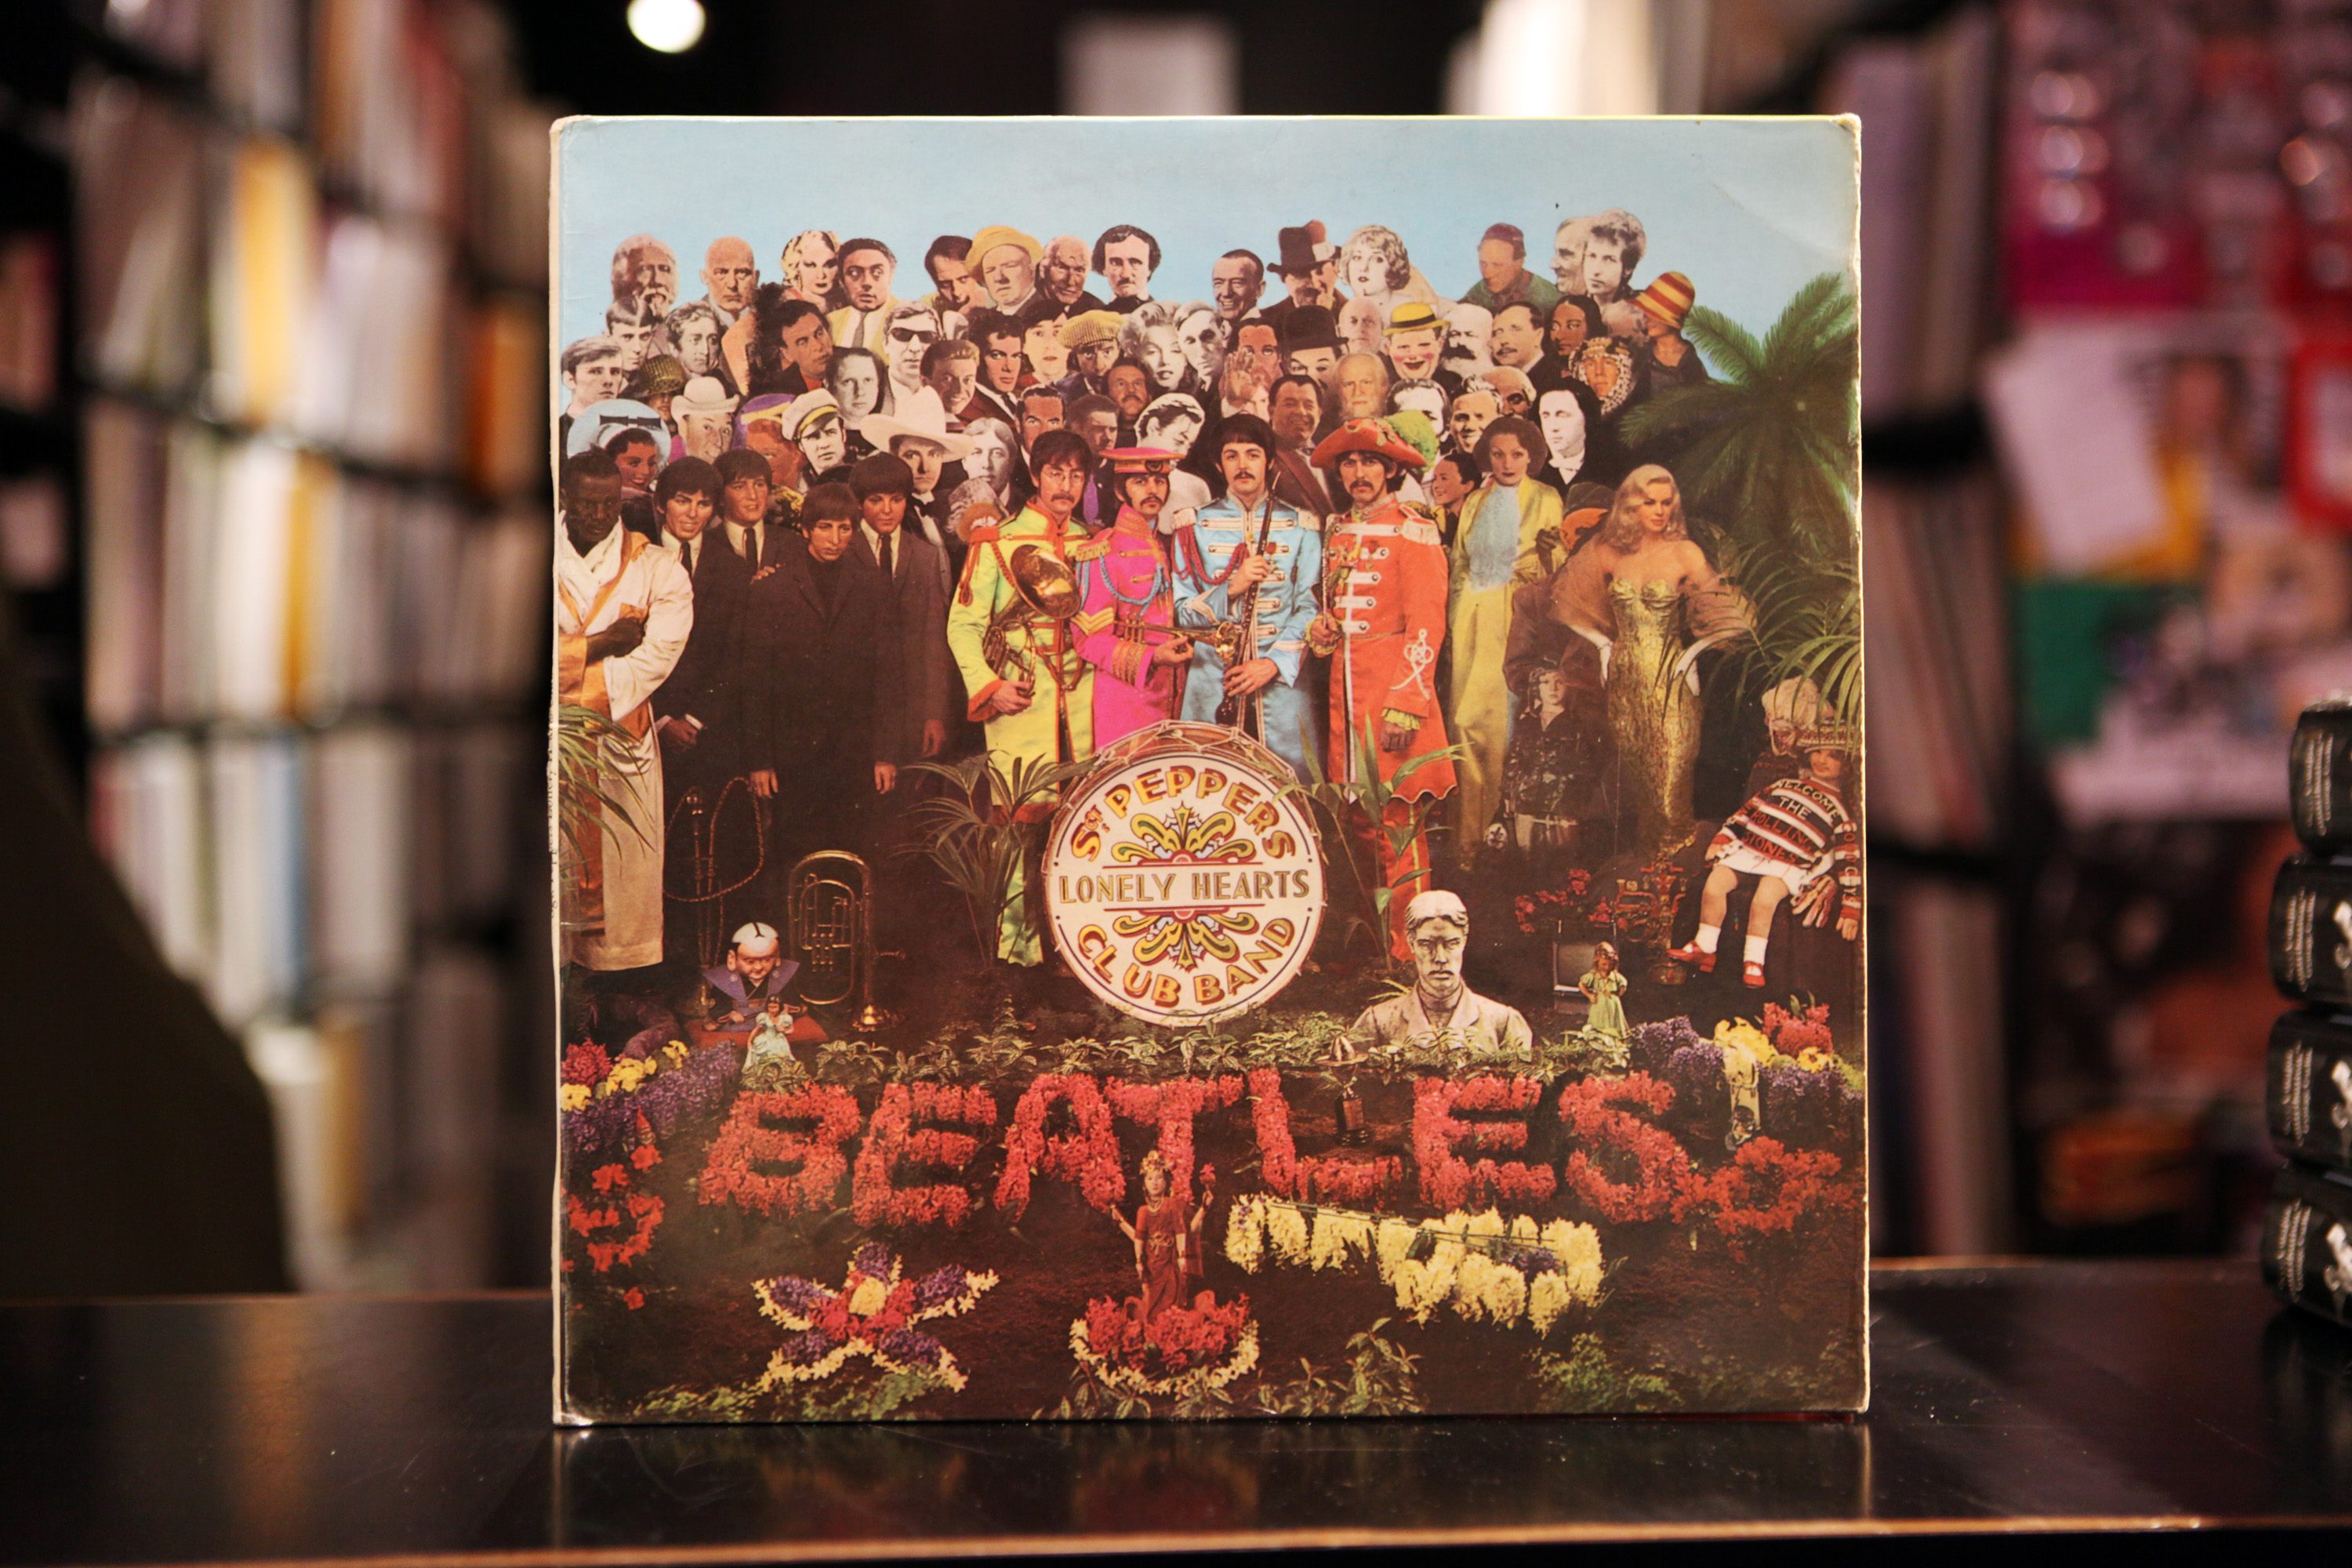 The Beatles' 'Sgt. Pepper's Lonely Hearts Club Band' on vinyl